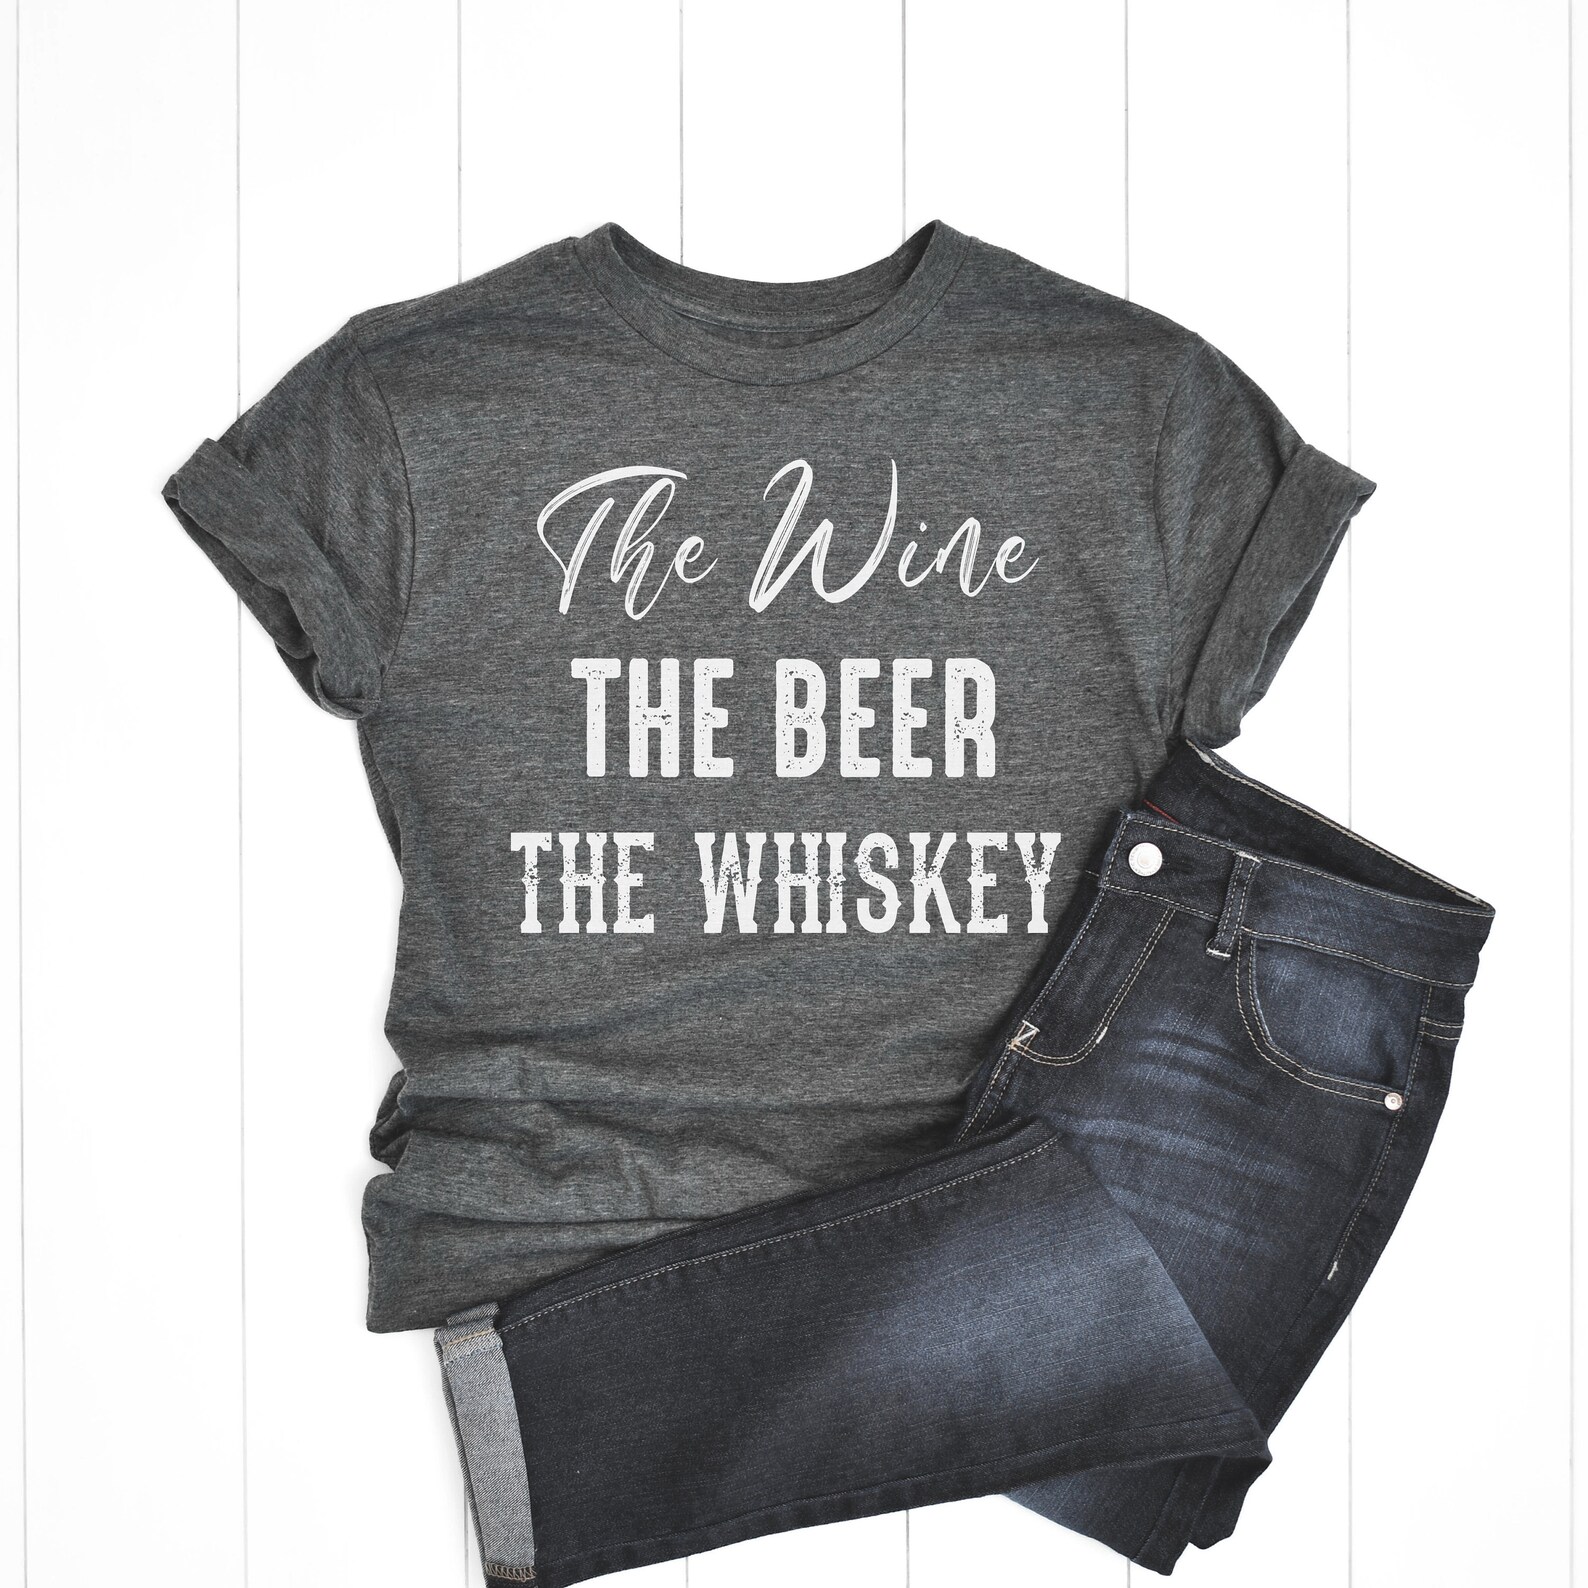 The Wine the Beer the Whiskey Shirt Whiskey Shirt Beer